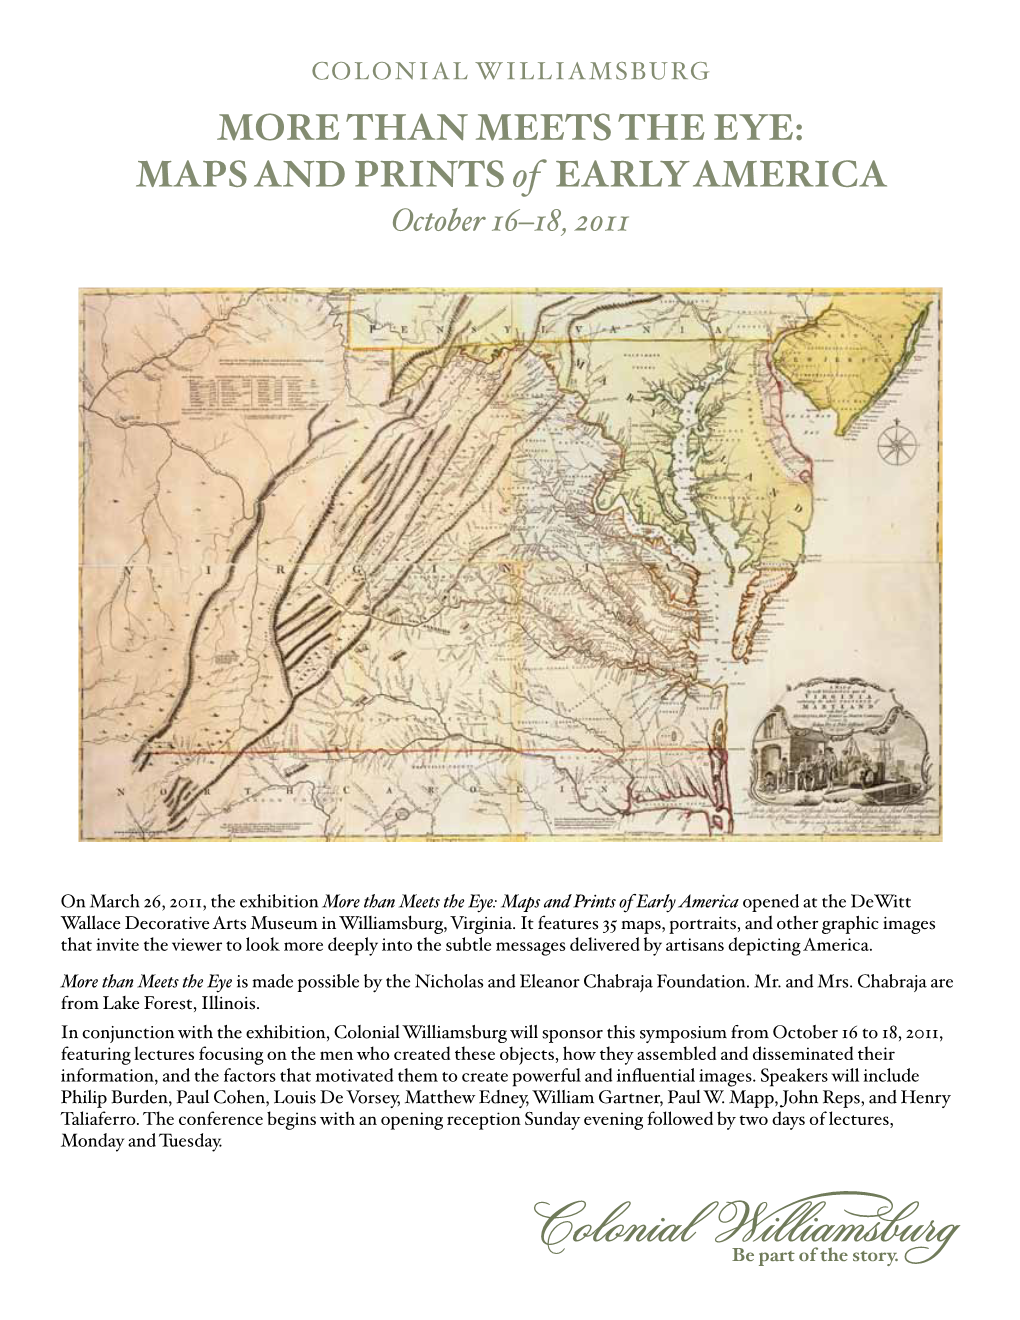 MAPS and PRINTS of EARLY AMERICA October 16–18, 2011